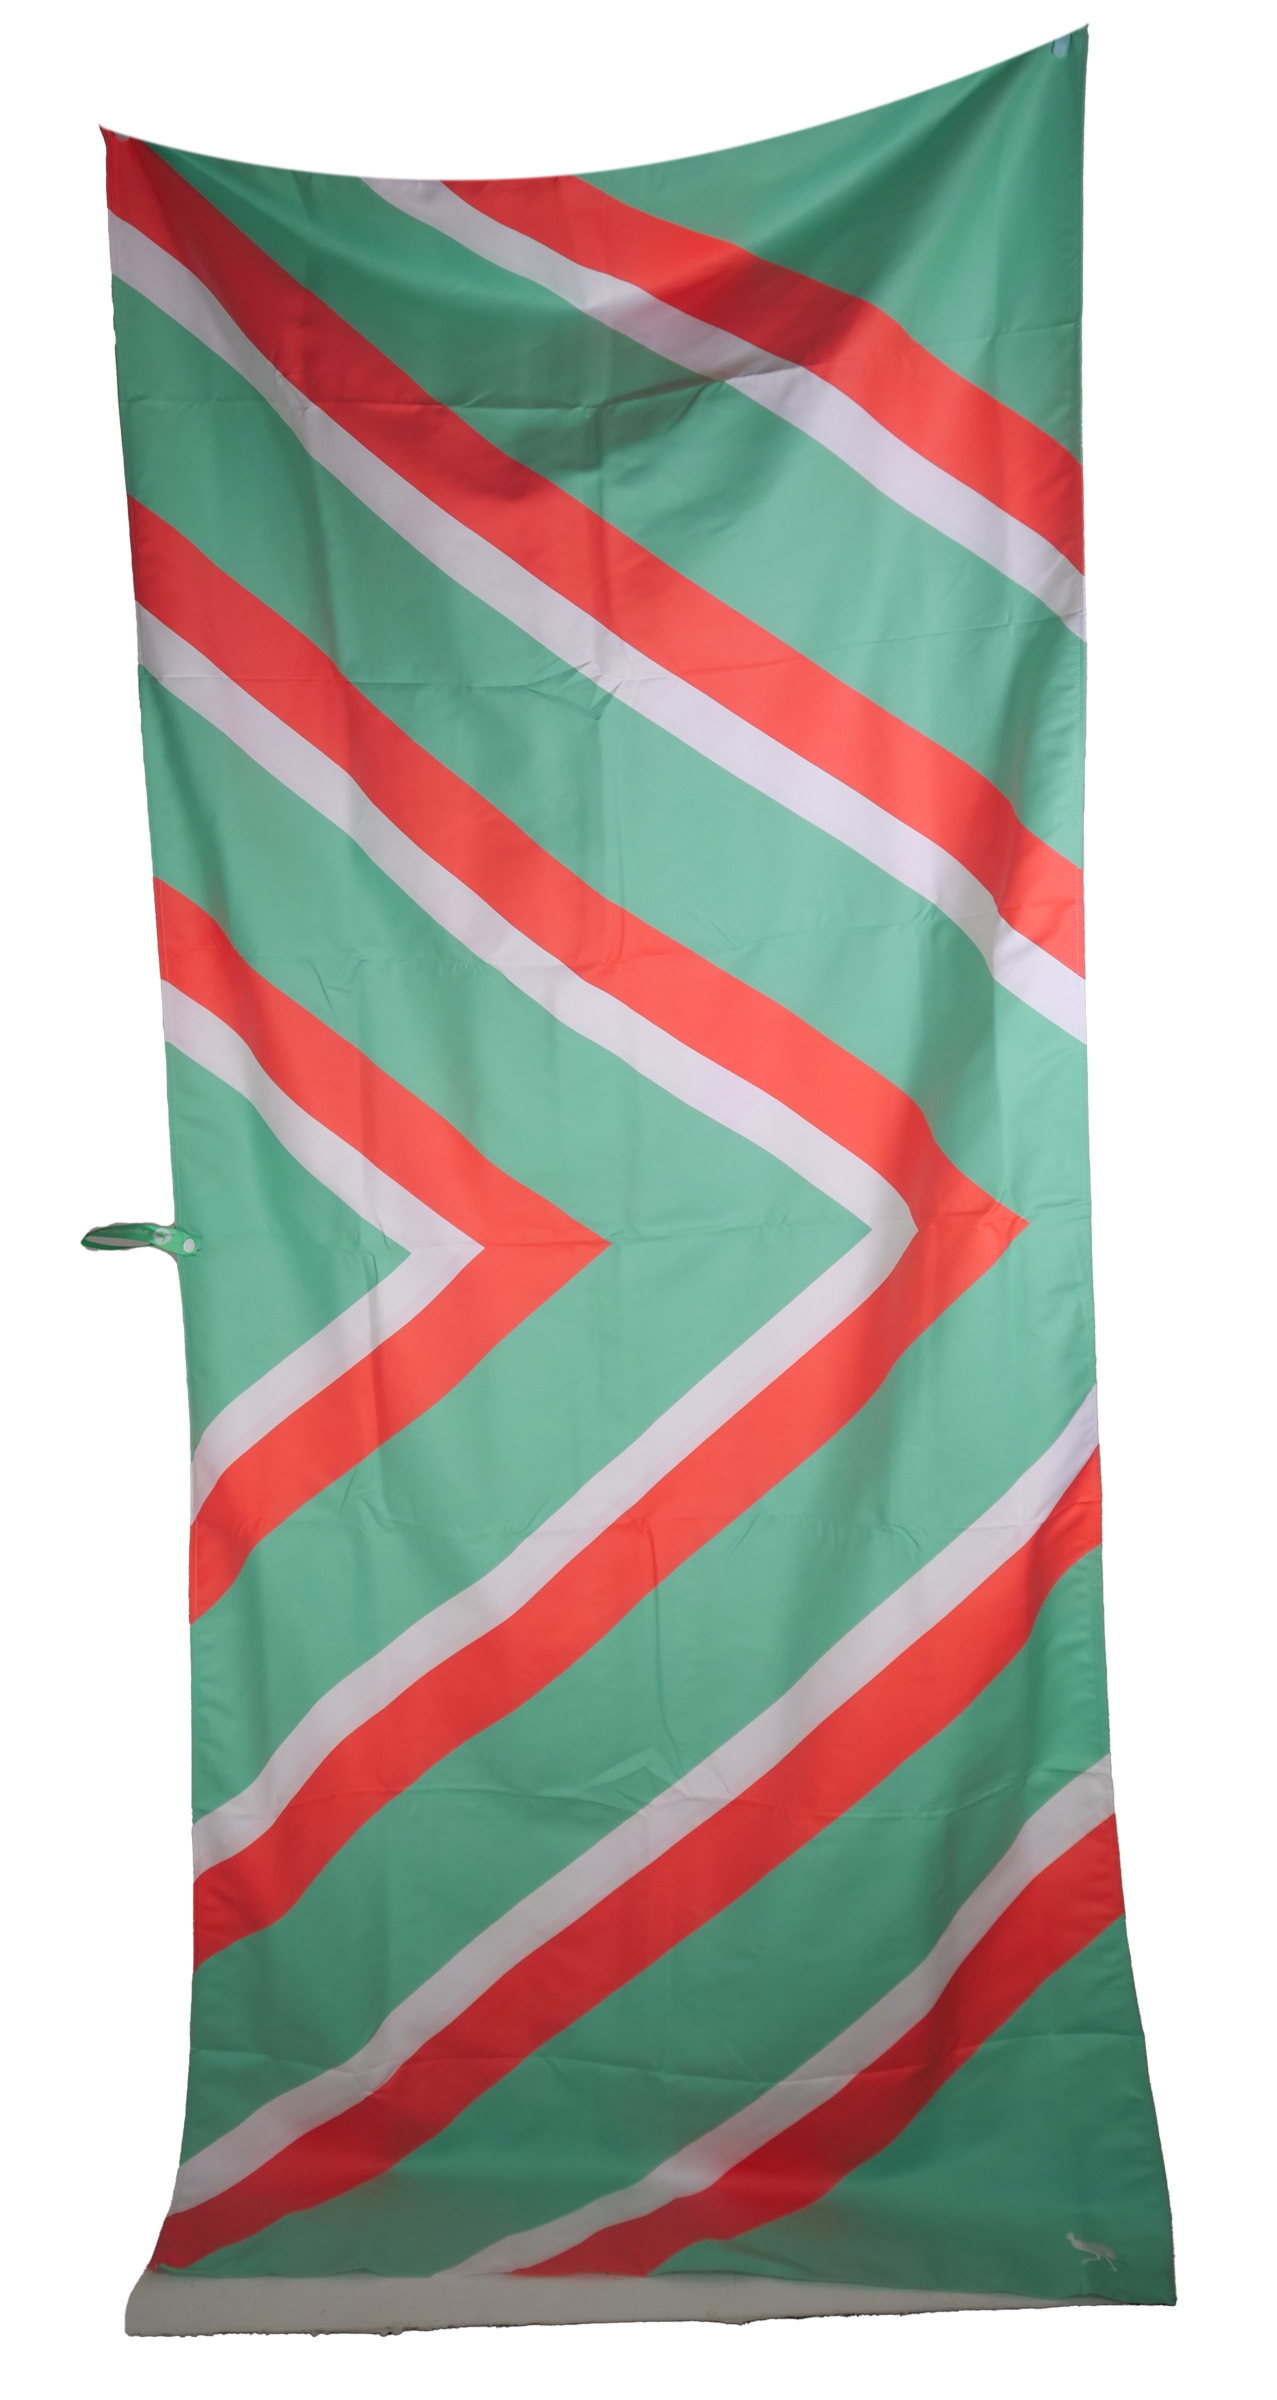 Sustainable Chevron Towel - Turquoise Red White